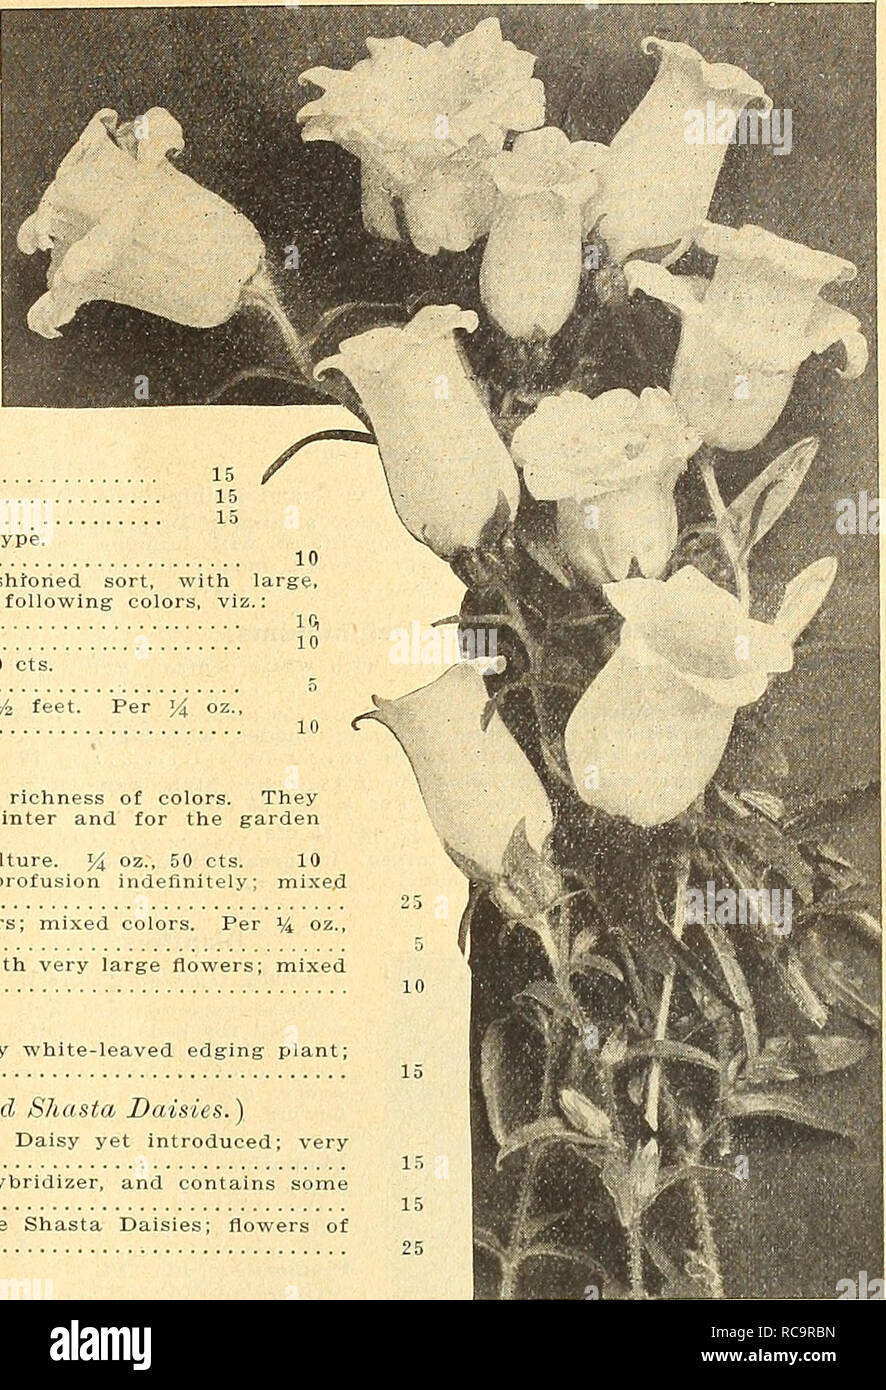 . Dreer's autumn catalogue 1916. Bulbs (Plants) Catalogs; Flowers Seeds Catalogs; Gardening Equipment and supplies Catalogs; Nurseries (Horticulture) Catalogs; Vegetables Seeds Catalogs. i &quot;tilHRYADREHt -PHIIADELPIHA#^ ftfUASLE FLOWER SEEDS 73 10 10 Campanula (Bellflower). Per Pkt Carpatica (Carpathian Hare-Bell). In bloom the whole season;- hardy perennial; blue; 6 inches. Per Y± oz., 40 cts —Alba. White-flowered form. Per ]4 oz-- 40 cts Persicifolia Grandiflora (Peach Bells). One of the finest; grows 2 to 3 feet high, with large flowers; blue 15 —Alba. White-flowering 15 Pyramidalis (Th Stock Photo